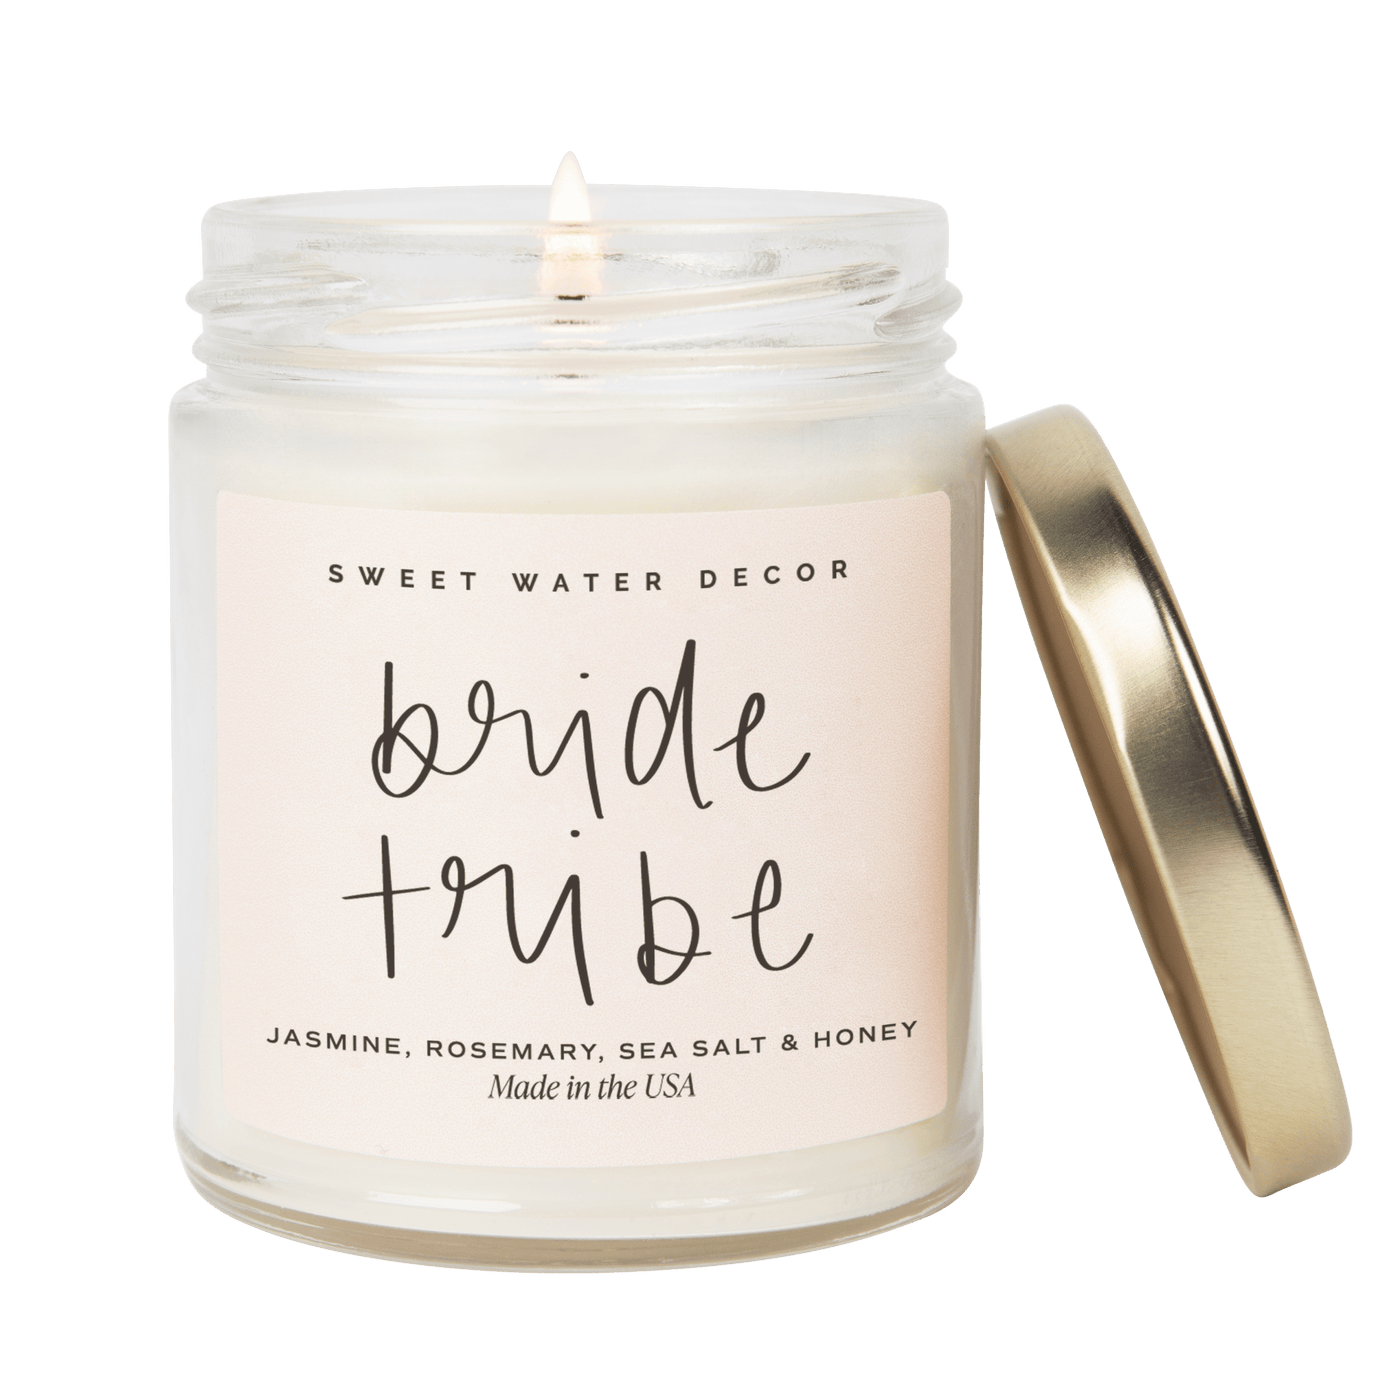 Bride Tribe Soy Candle - Clear Jar - 9 oz (Wildflowers and Salt) - Sweet Water Decor - Candles